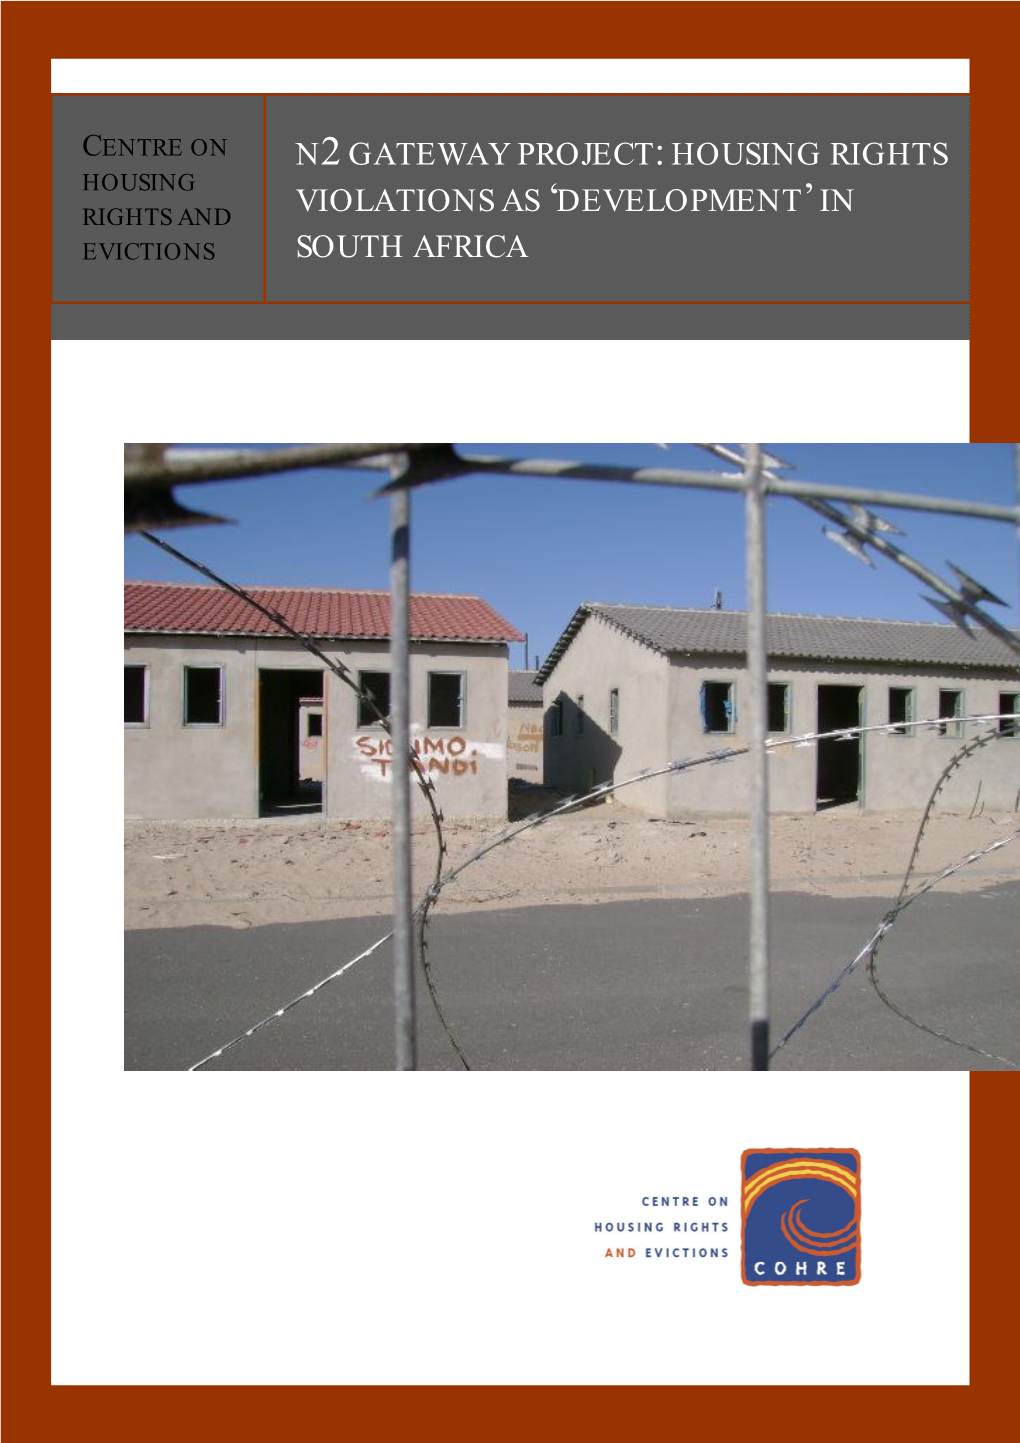 N2 Gateway Project: Housing Rights Violations As ‘Development’ in South Africa